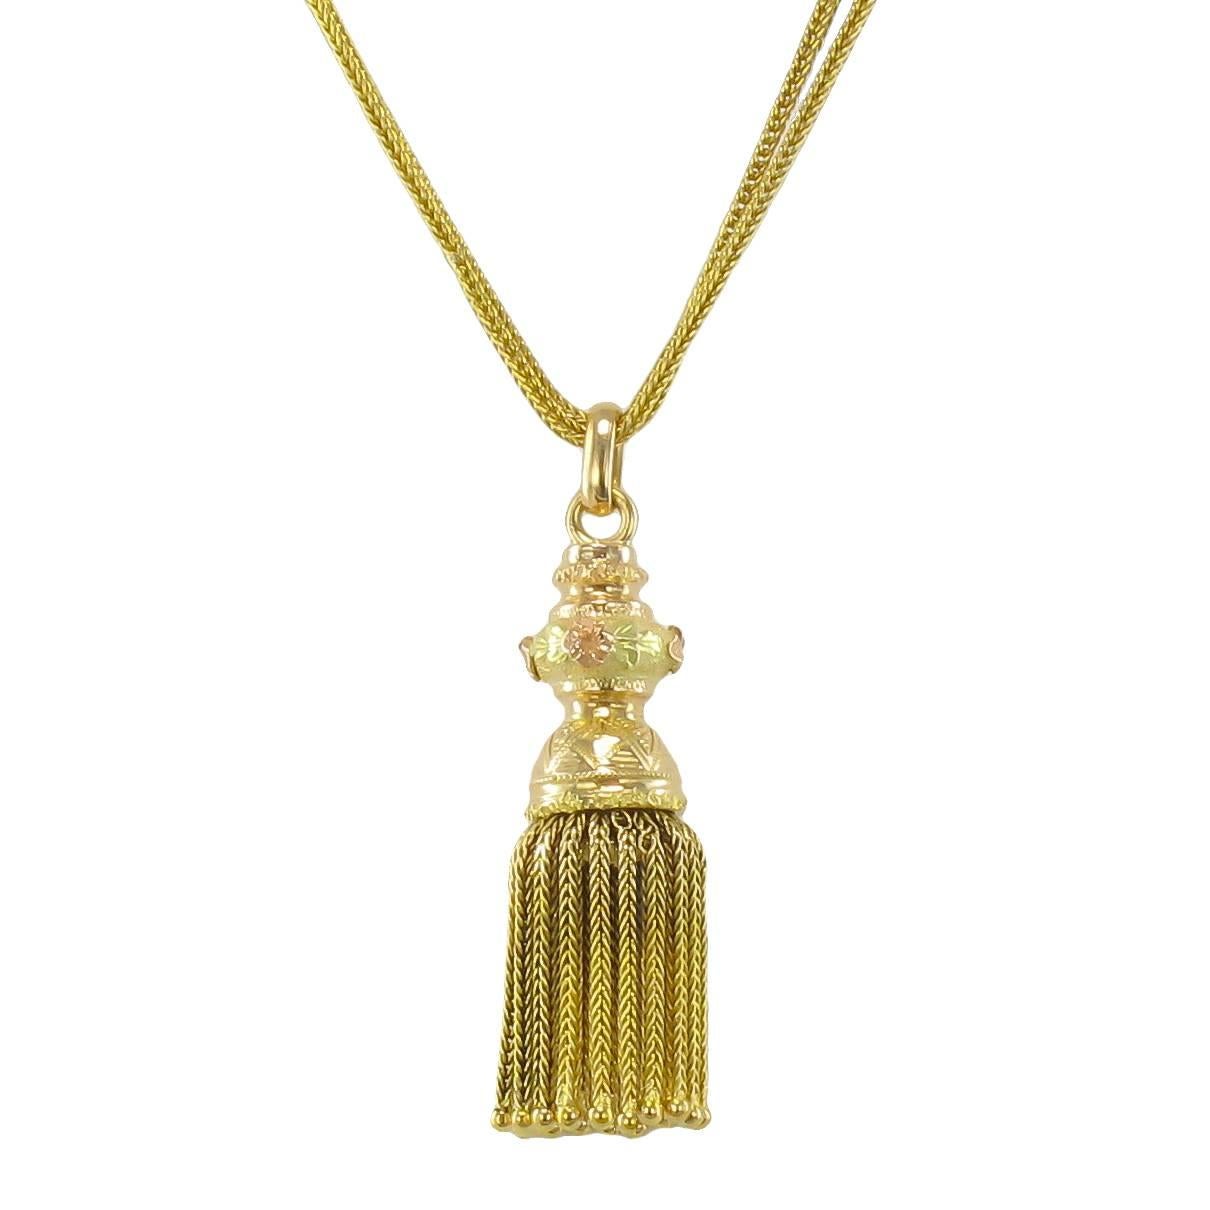 French Napoleon III Antique Gold Chain Necklace with Pompom Pendant